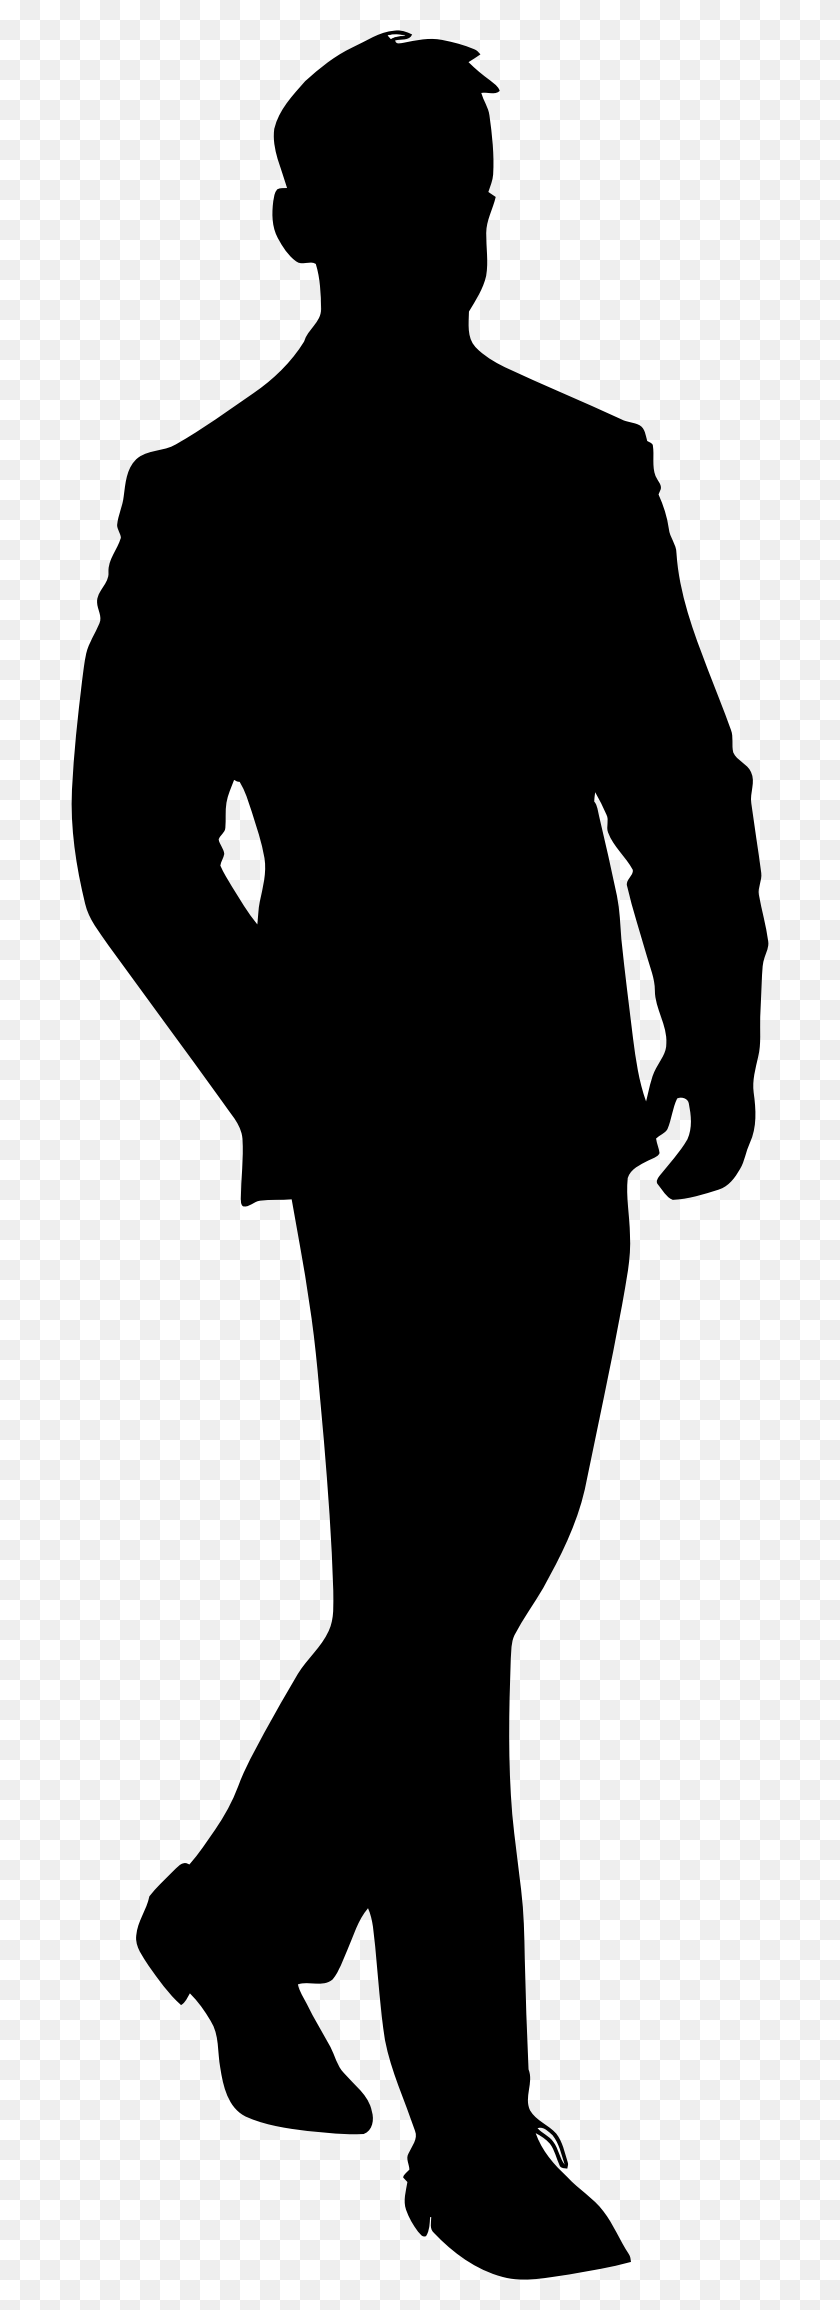 698x2250 Man In Suit Silhouette Icons Png - Silhouette Man PNG